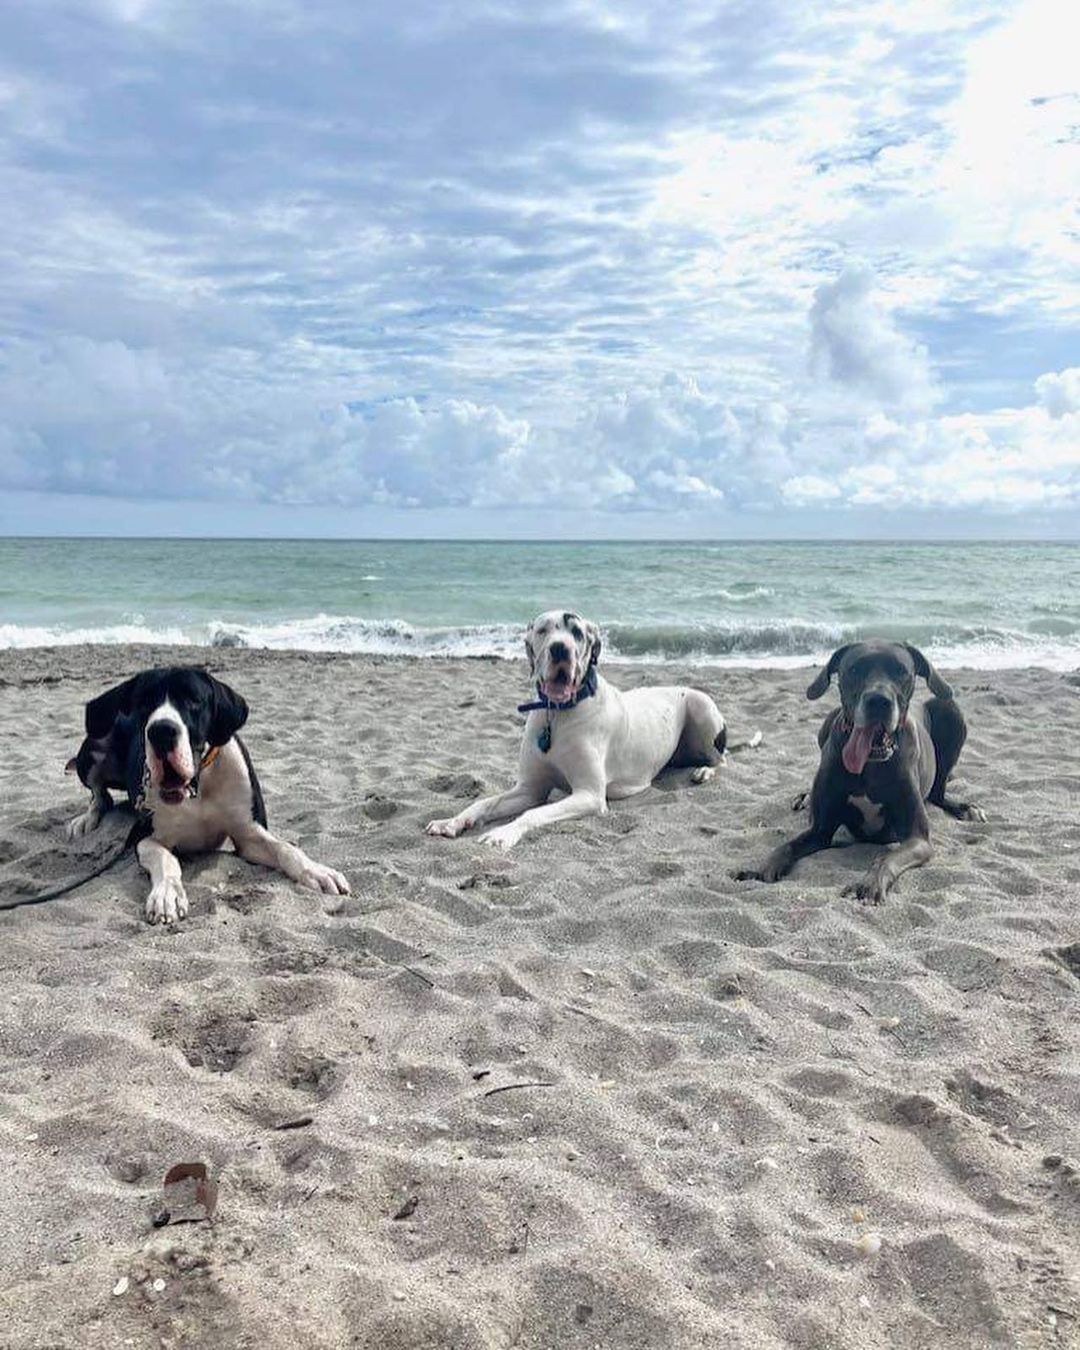 HAPPY TAILS UPDATE!! 

Y’all remember goofy Jace, right? Well he’s living the south Florida beach life now, his new name is Colt and he’s found his forever family with Ashley and George and new dane sister, Athena! The dynamic drool duo are already two peas in a pod together!! 

We are so excited for him! ❤️🐾🙌 So without further ado, everyone please shout out: “Welcome home Colt!” 

@athenathehousecow <a target='_blank' href='https://www.instagram.com/explore/tags/greatdane/'>#greatdane</a> <a target='_blank' href='https://www.instagram.com/explore/tags/greatdanesofinstagram/'>#greatdanesofinstagram</a> <a target='_blank' href='https://www.instagram.com/explore/tags/danesofinstagram/'>#danesofinstagram</a> <a target='_blank' href='https://www.instagram.com/explore/tags/rescuedane/'>#rescuedane</a> <a target='_blank' href='https://www.instagram.com/explore/tags/rescuesofinstagram/'>#rescuesofinstagram</a> <a target='_blank' href='https://www.instagram.com/explore/tags/dogsofinstagram/'>#dogsofinstagram</a> <a target='_blank' href='https://www.instagram.com/explore/tags/greatdanelove/'>#greatdanelove</a>